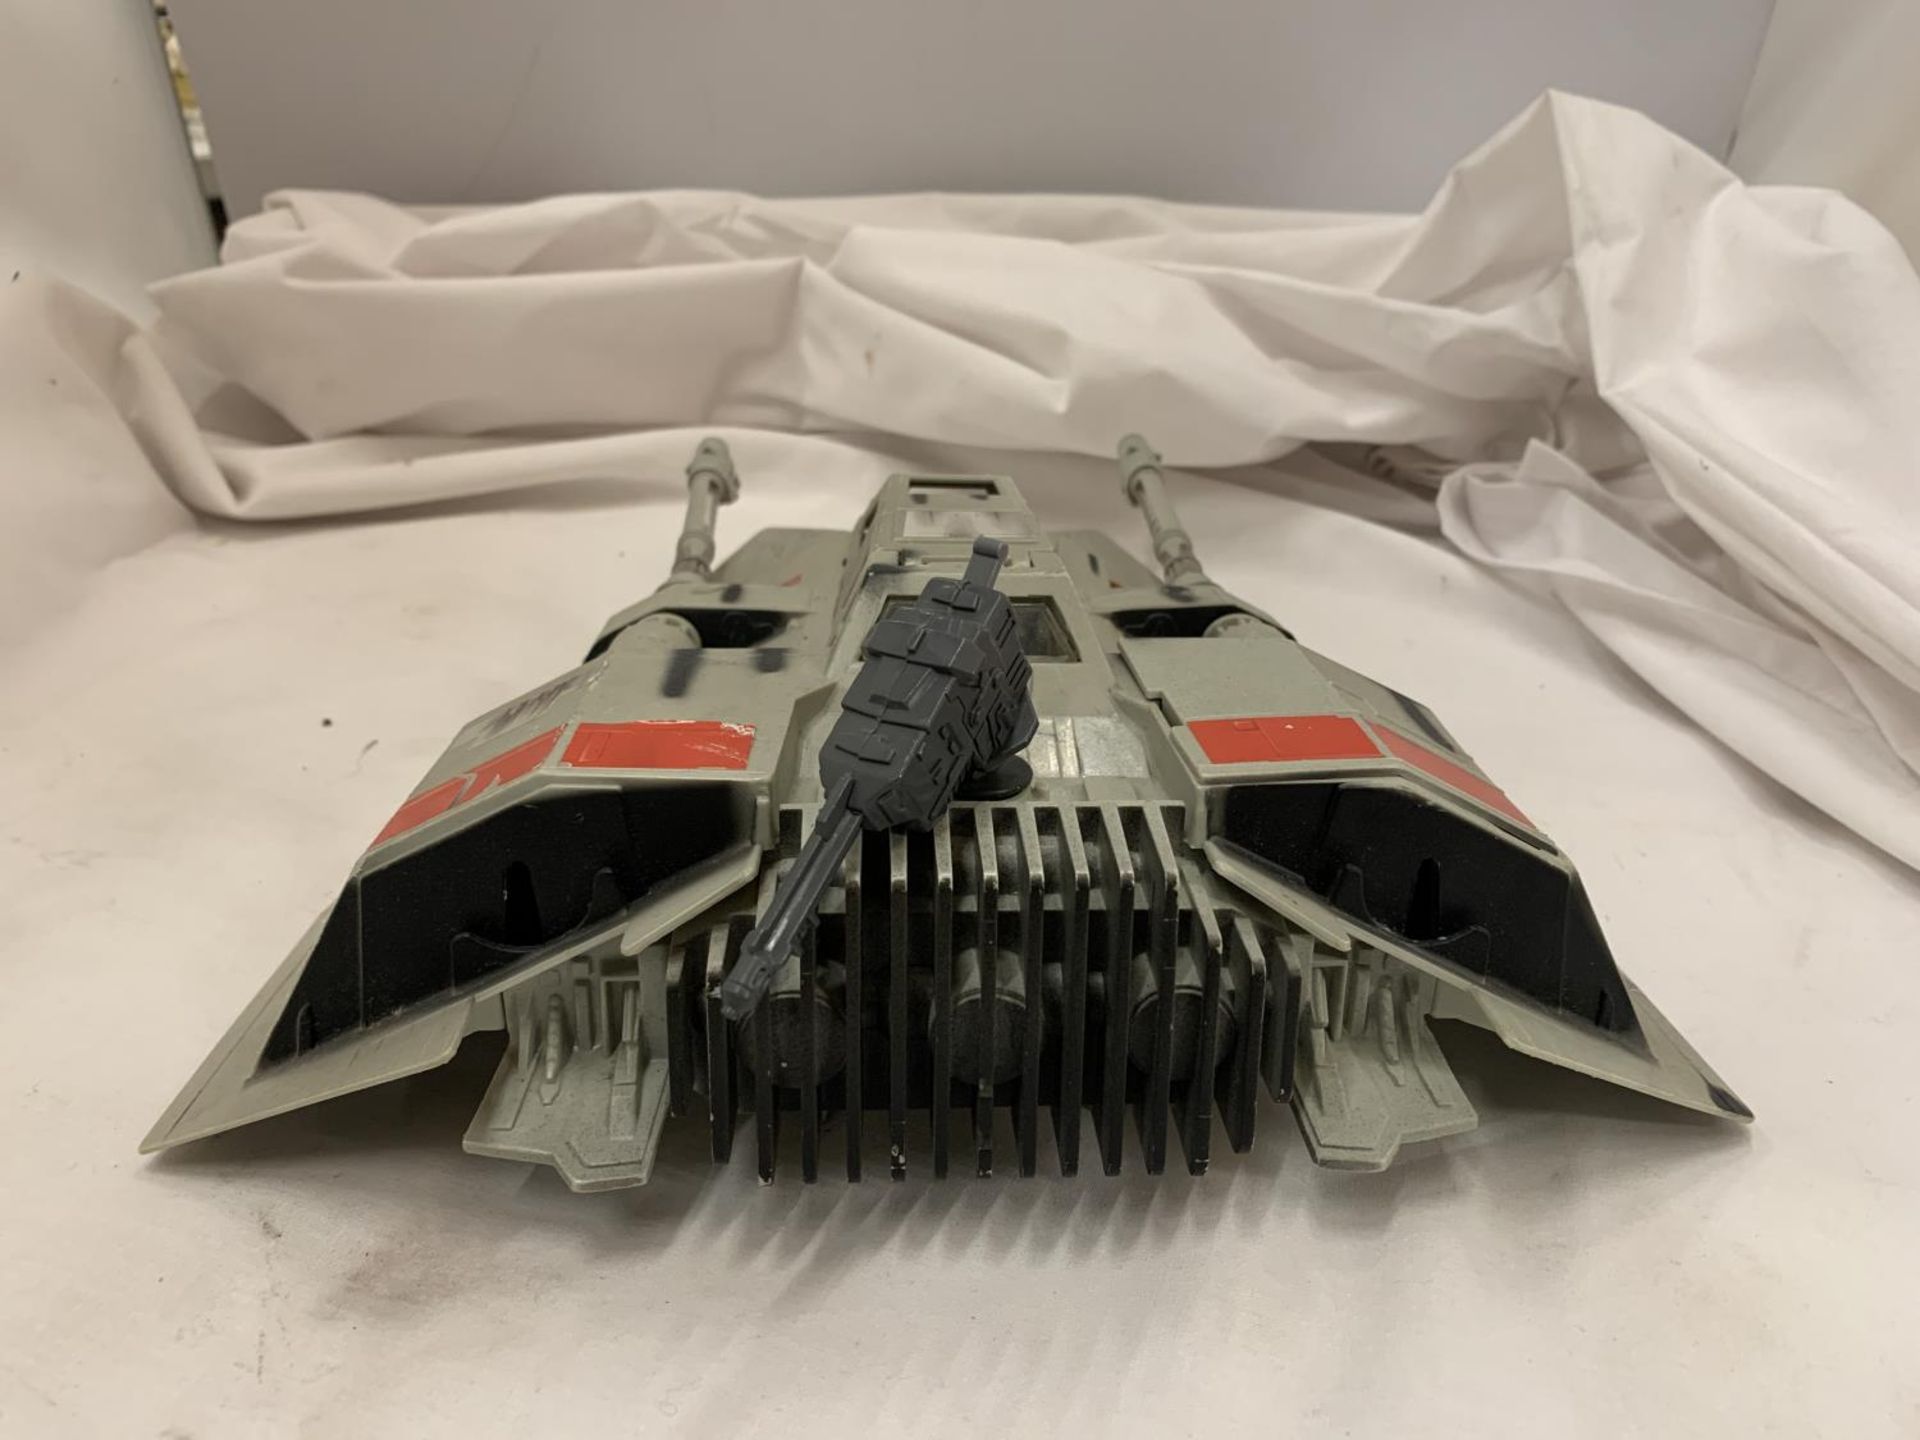 A STAR WARS MODEL OF A SNOW SPEEDER - Image 3 of 3